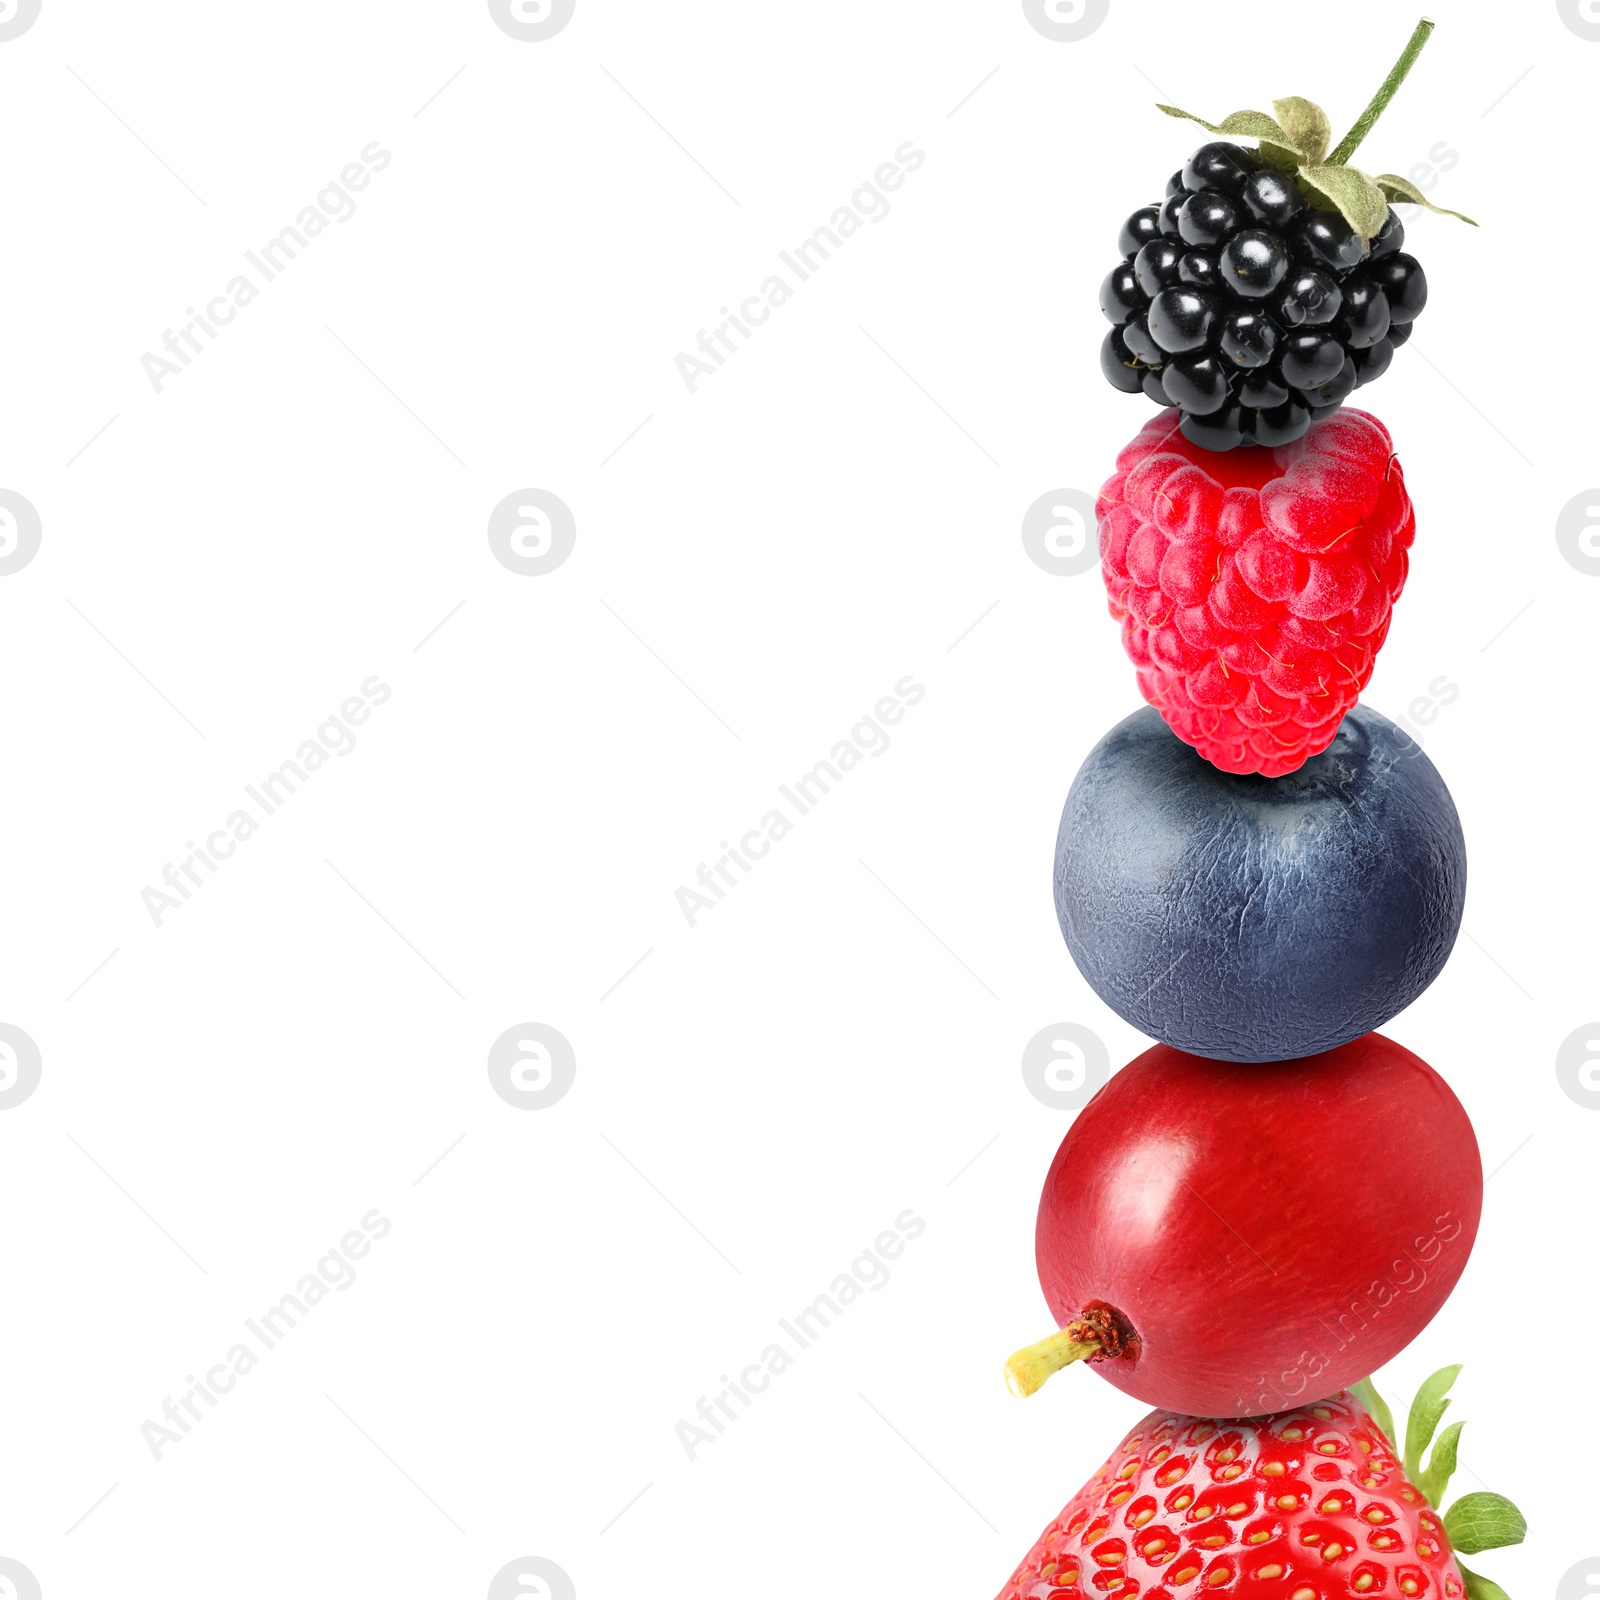 Image of Stack of different fresh tasty berries on white background